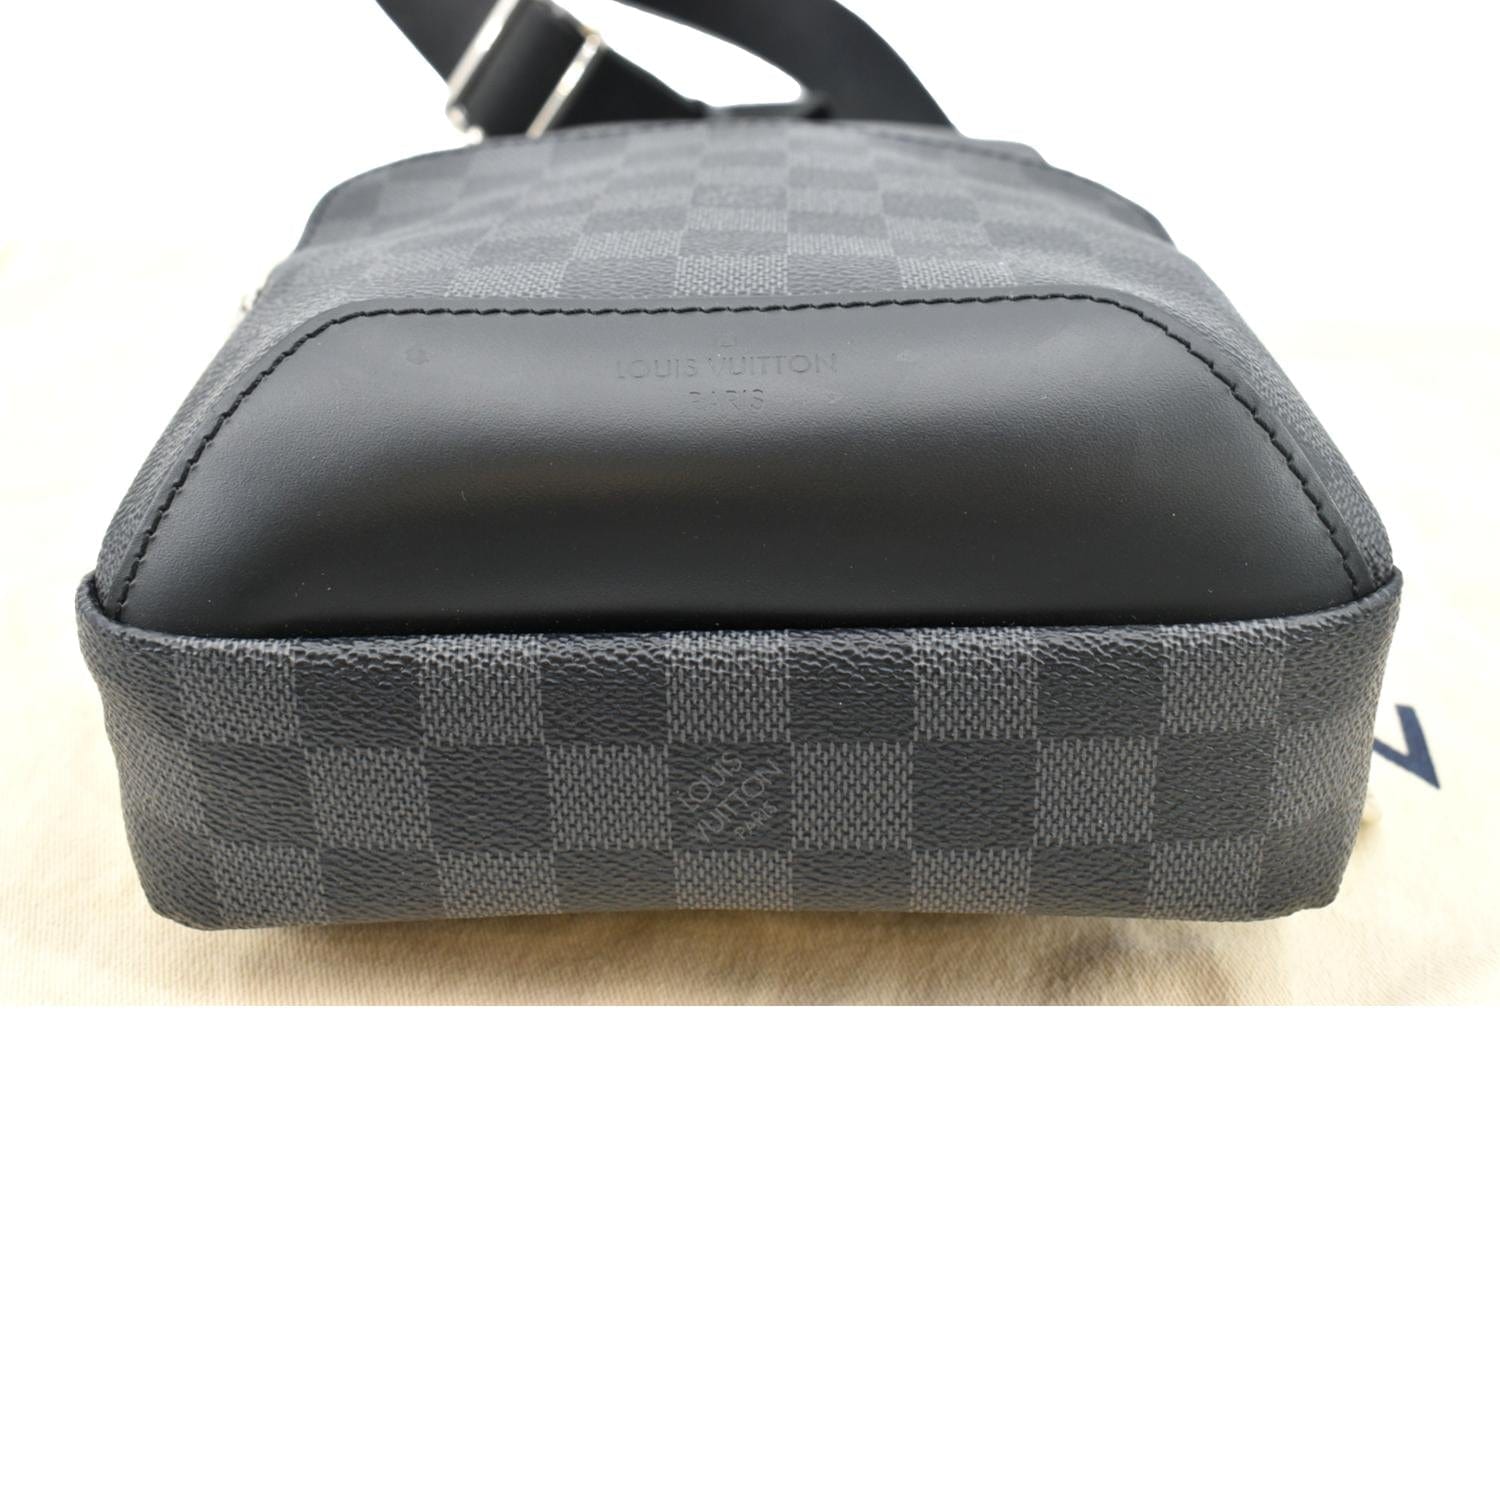 Louis Vuitton Avenue Sling Bag - 3 For Sale on 1stDibs